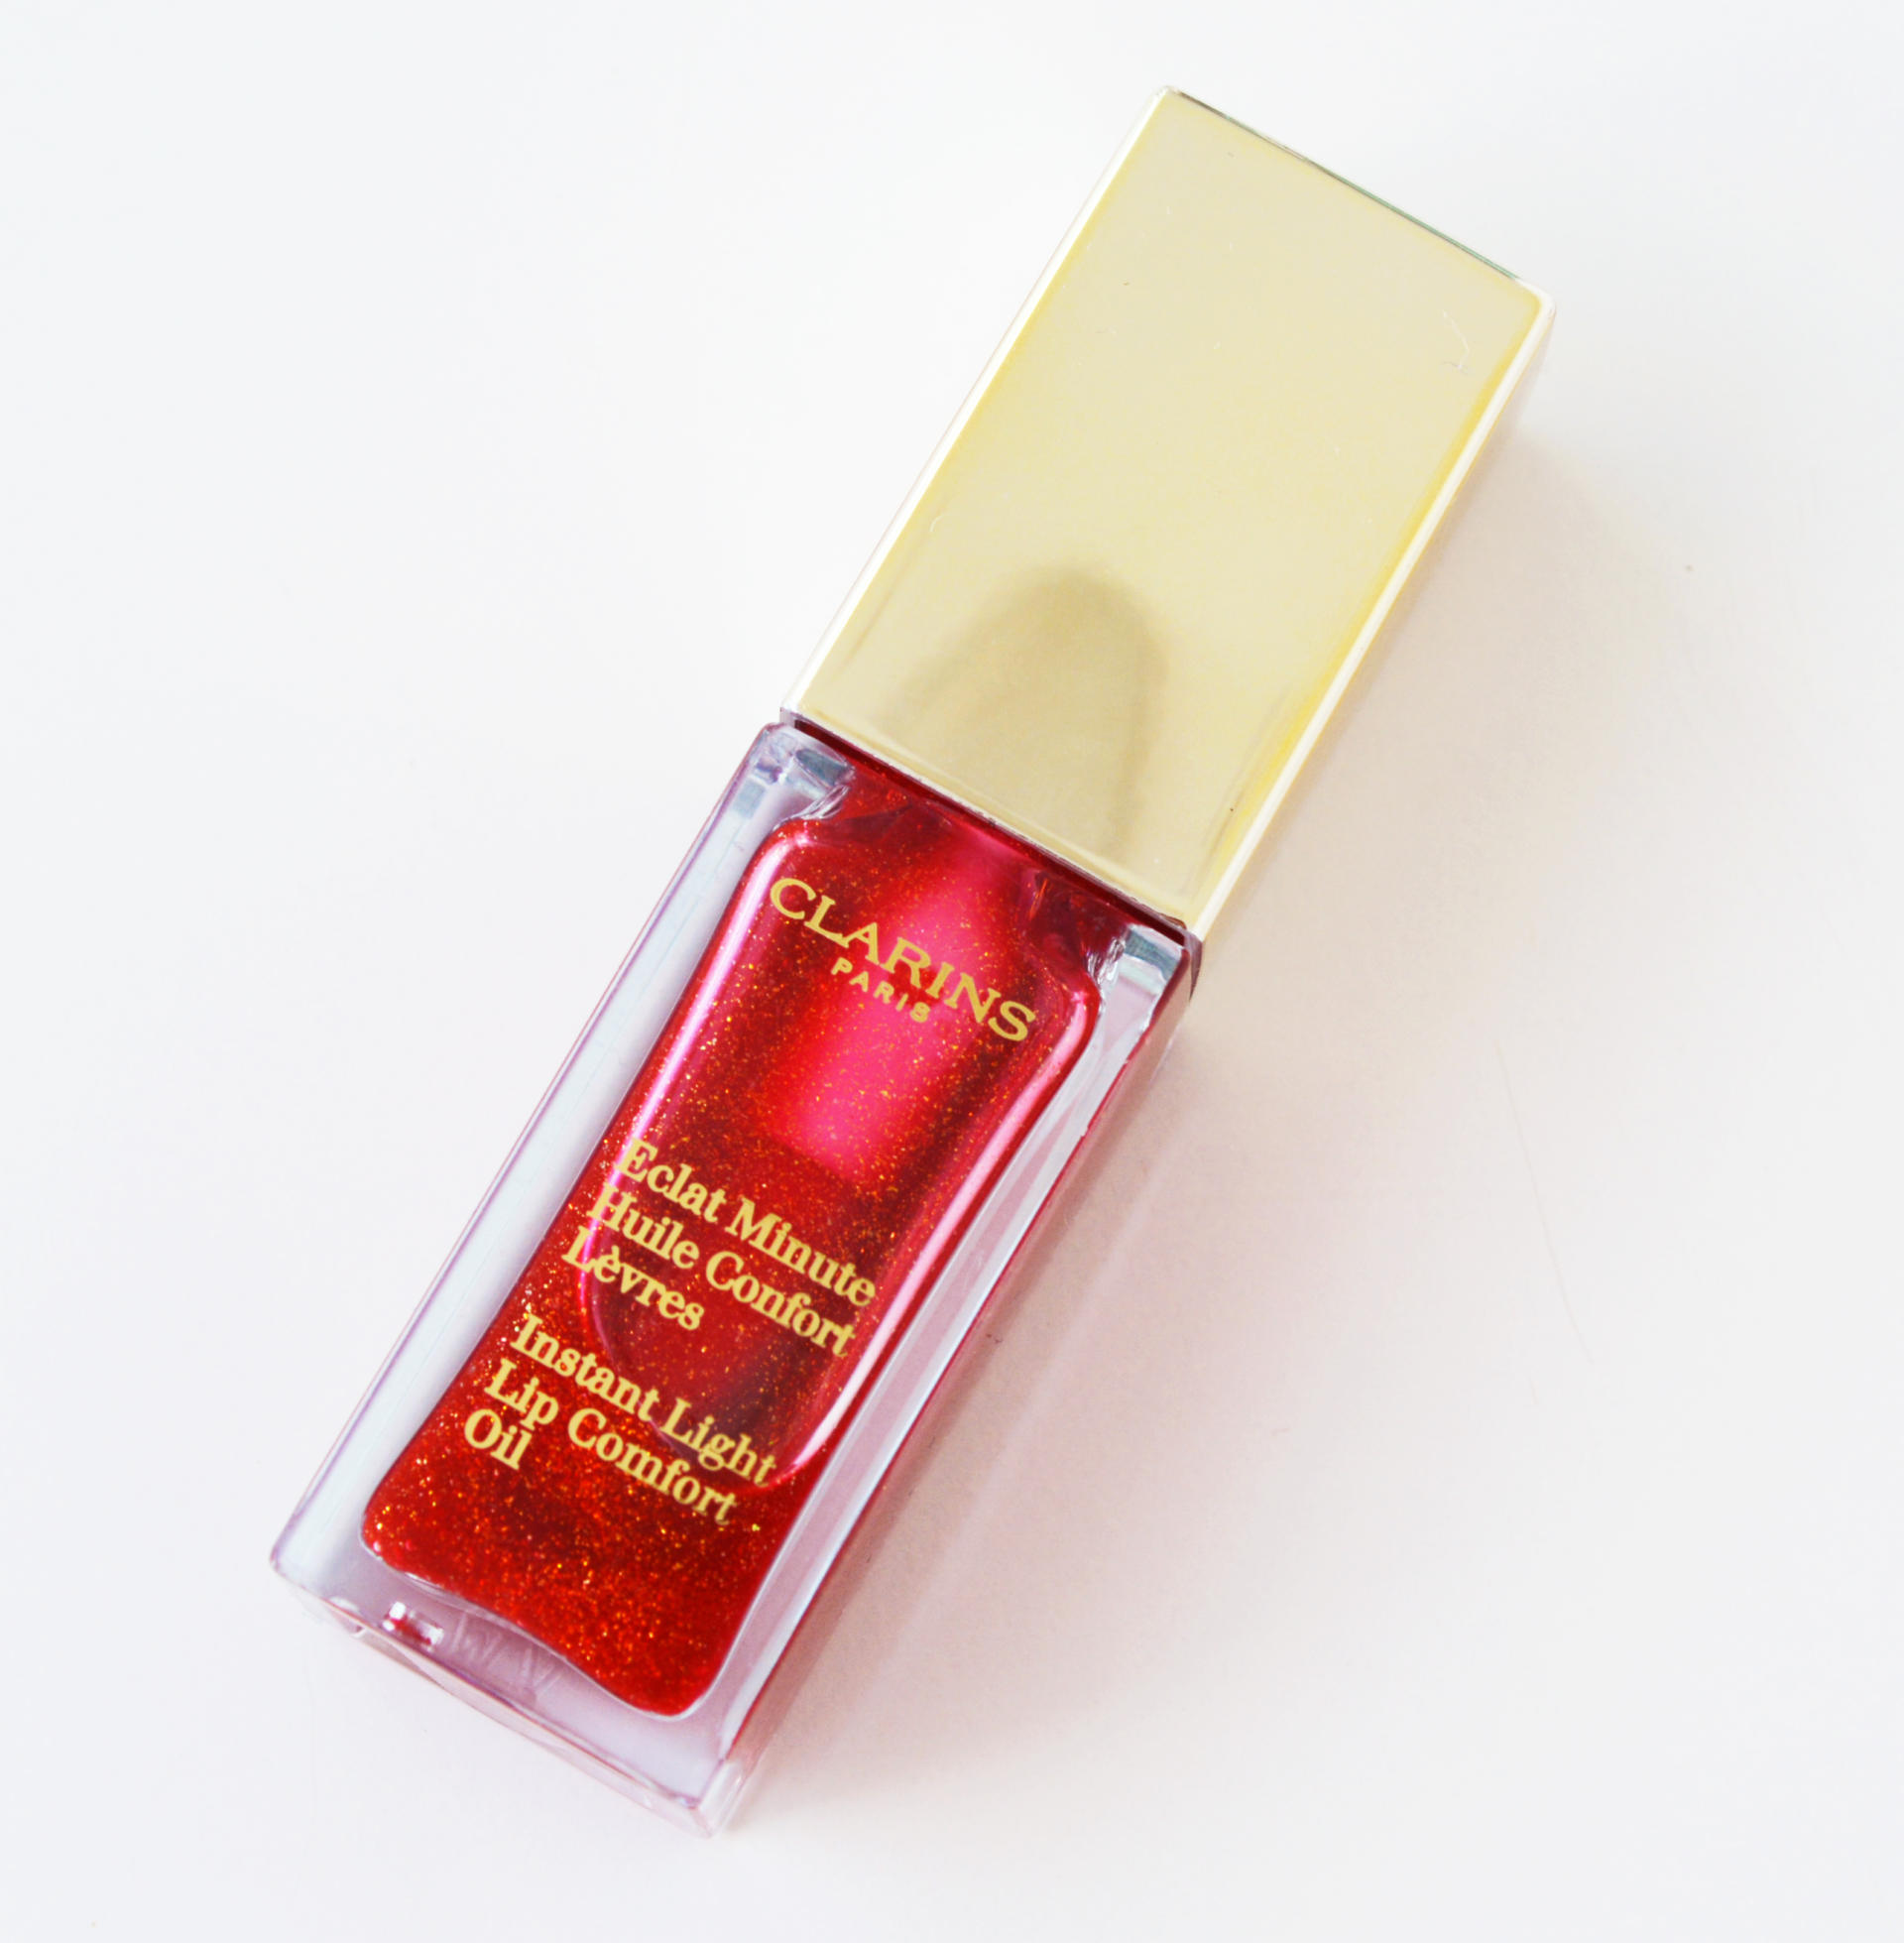 Clarins Instant Light Lip Comfort Oil 09 red berry glam